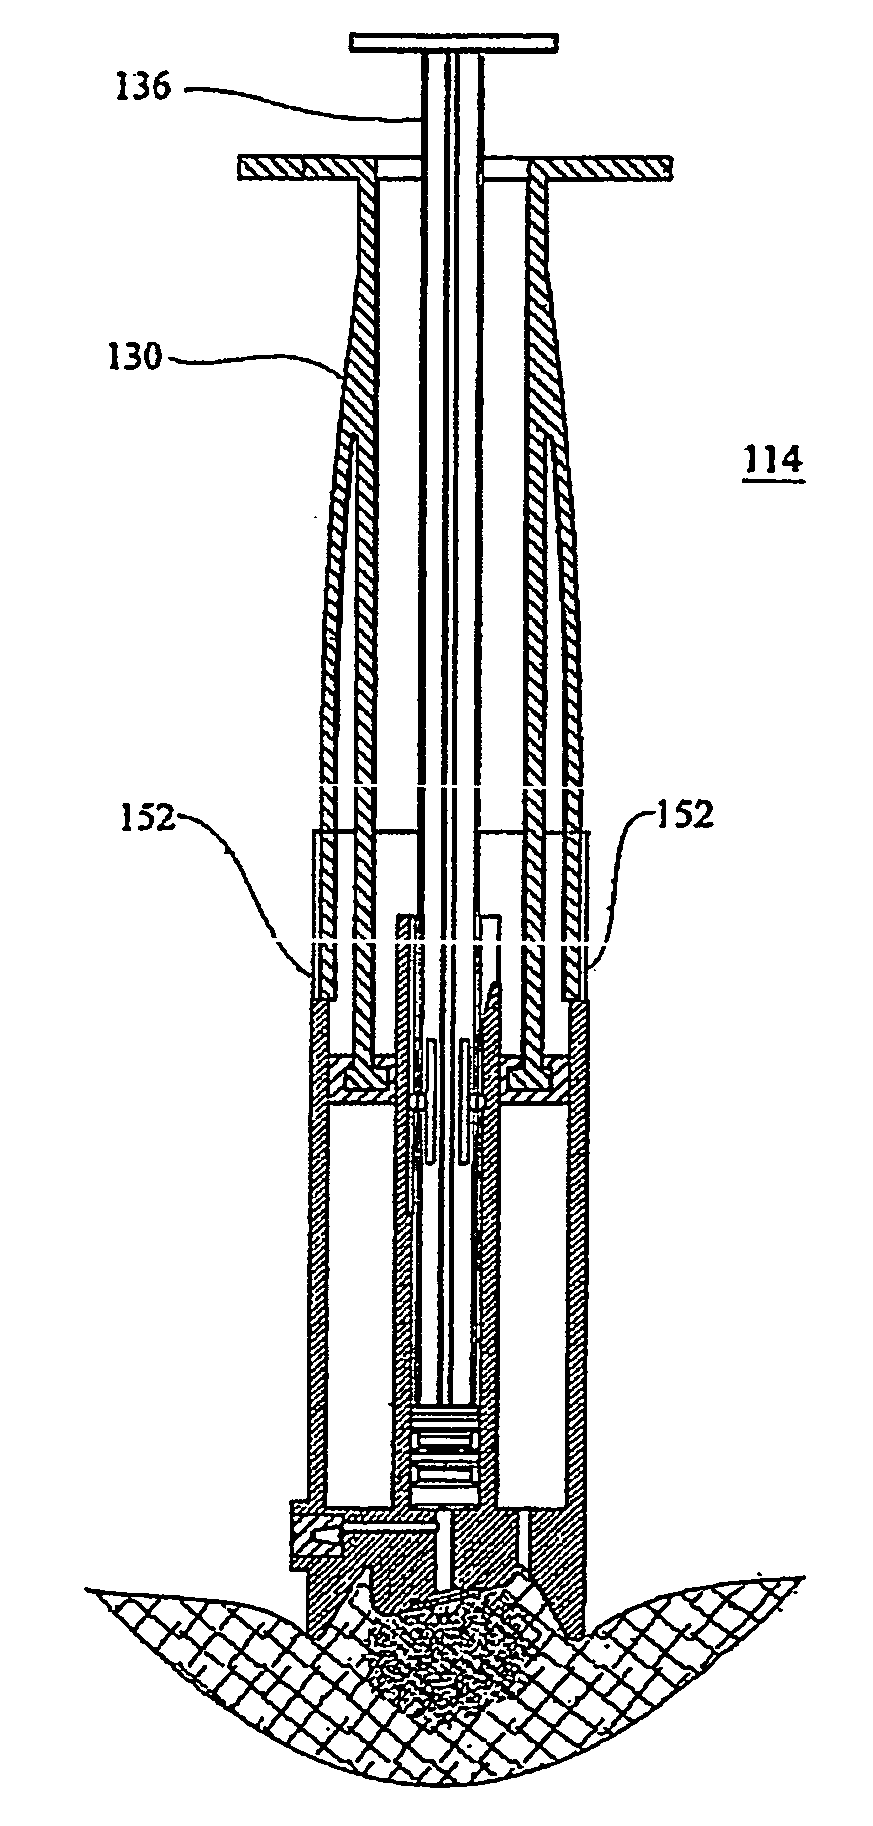 Enhanced penetration system and method for sliding microneedles